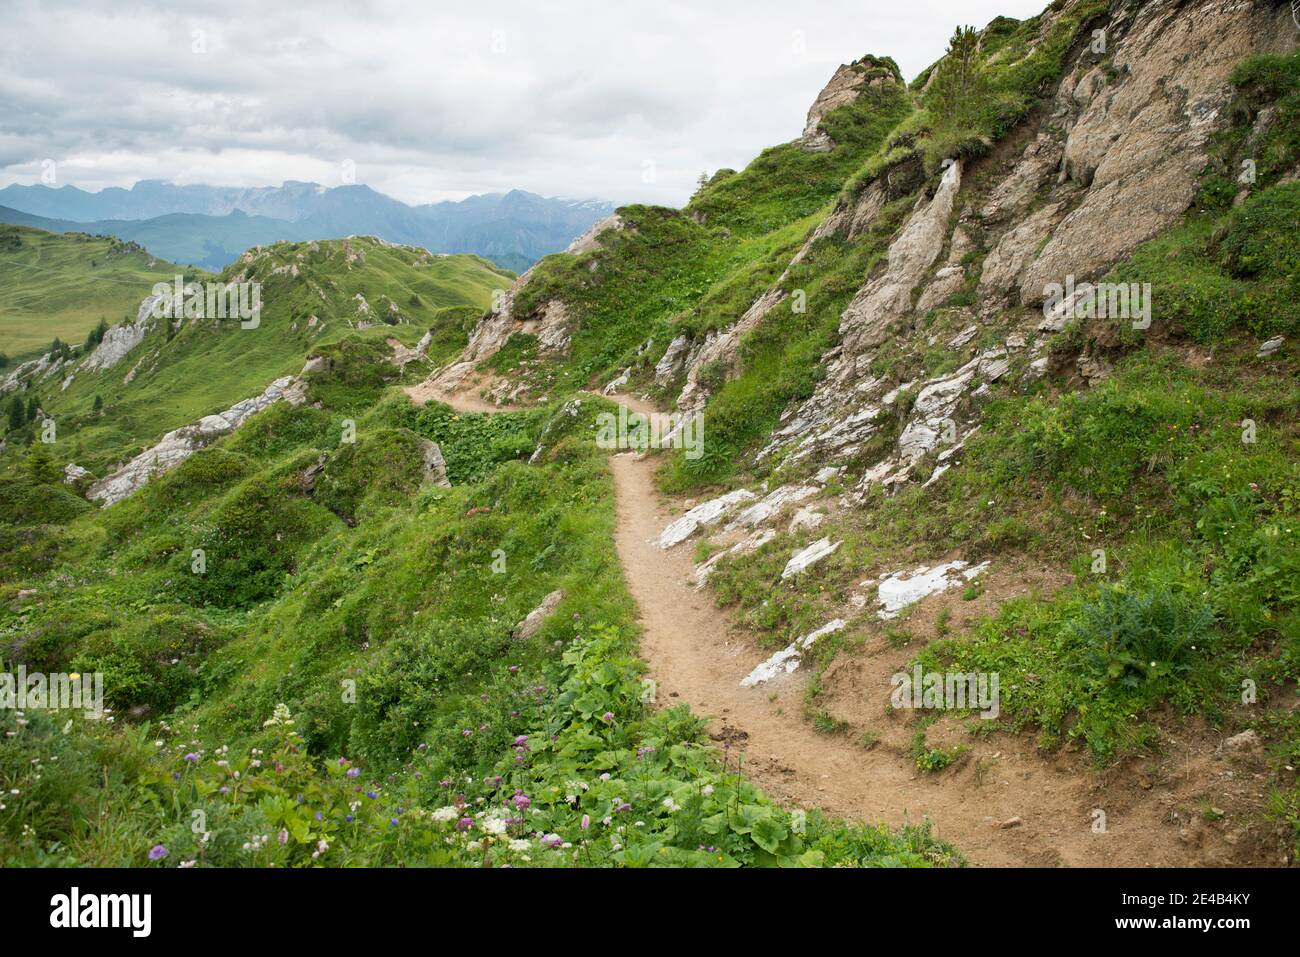 lonely hiking trail in hilly terrain, cloudy Stock Photo